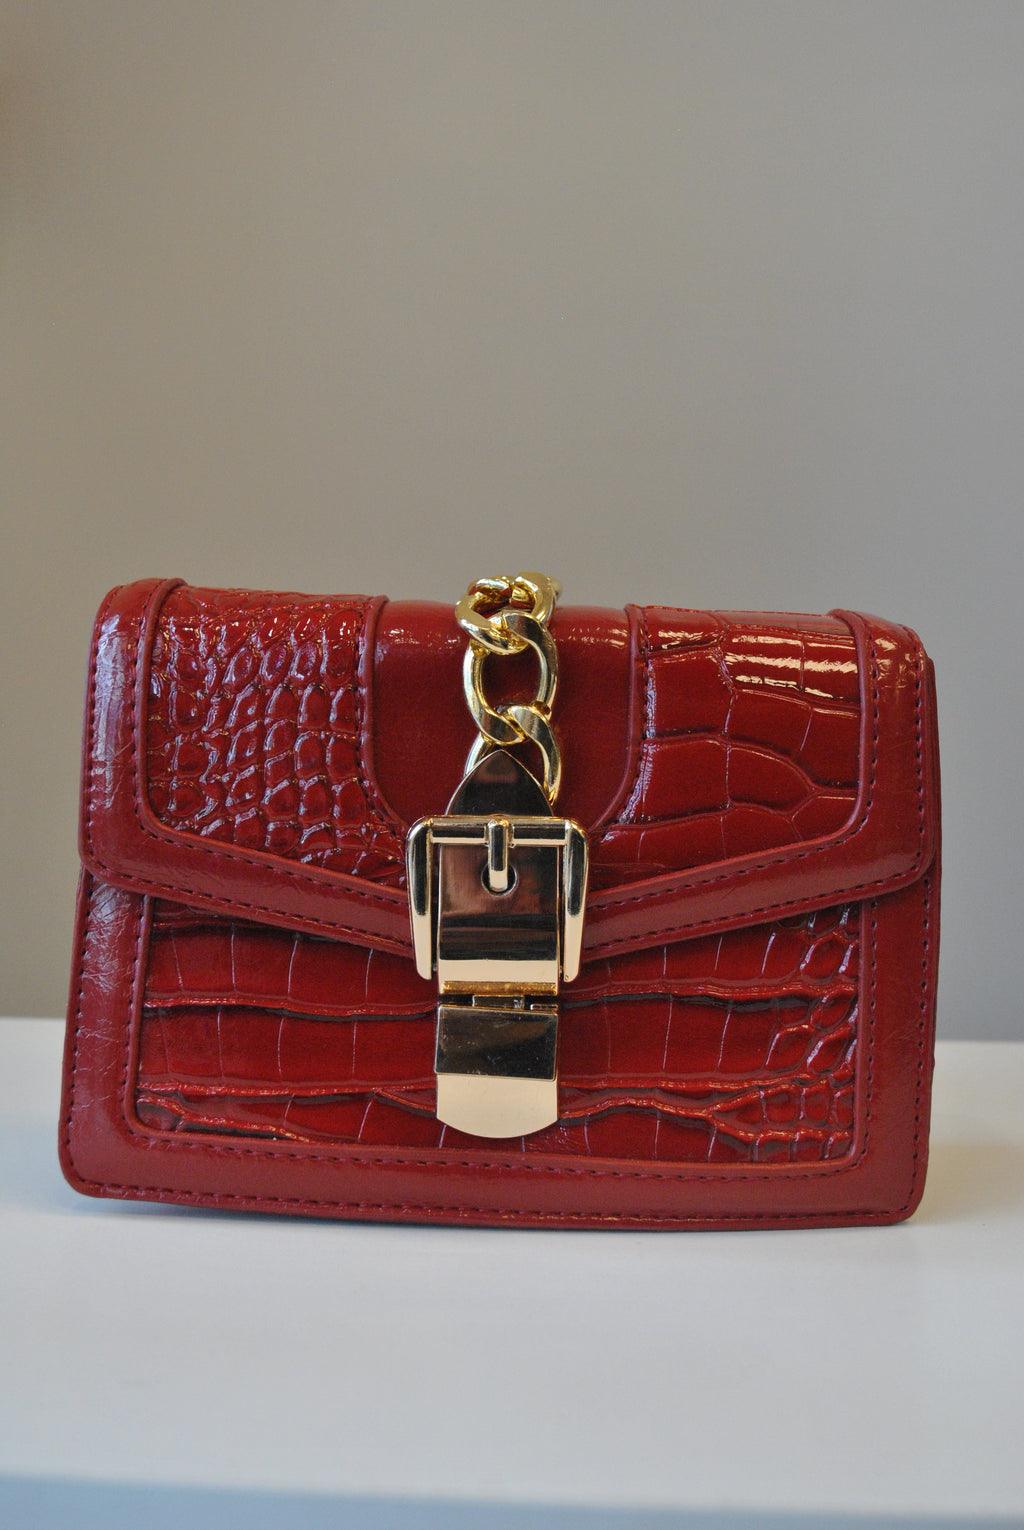 SMALL RED CROSSBODY HANDBAG WITH GOLD CHAIN